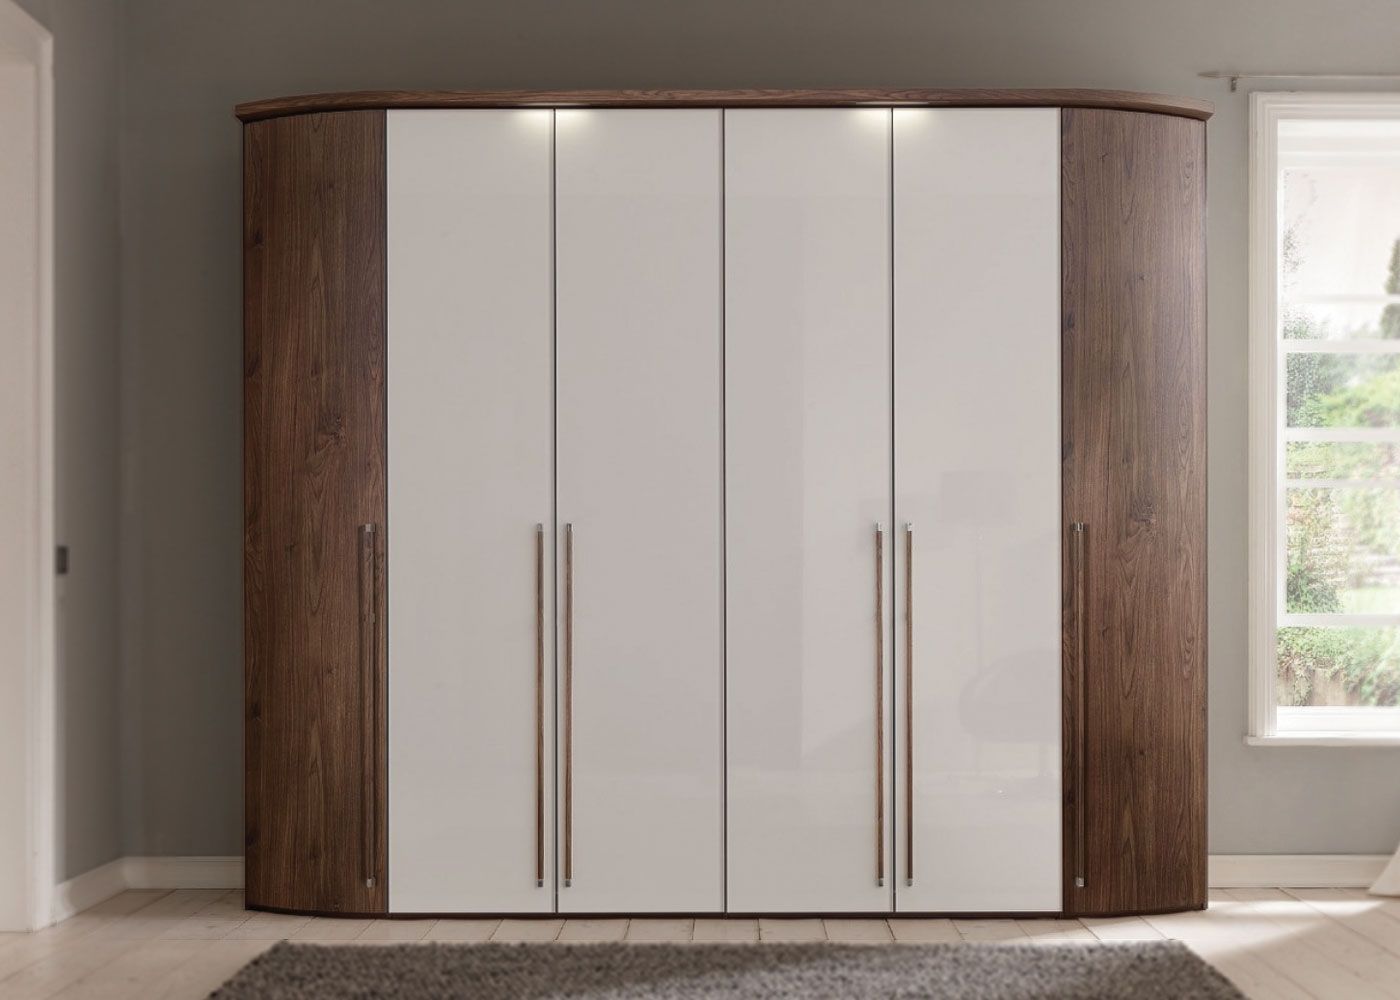 Nolte Möbel Horizon T100 Wardrobe With Curved Sides – Midfurn Furniture  Superstore Inside Curved Wardrobes Doors (View 10 of 20)